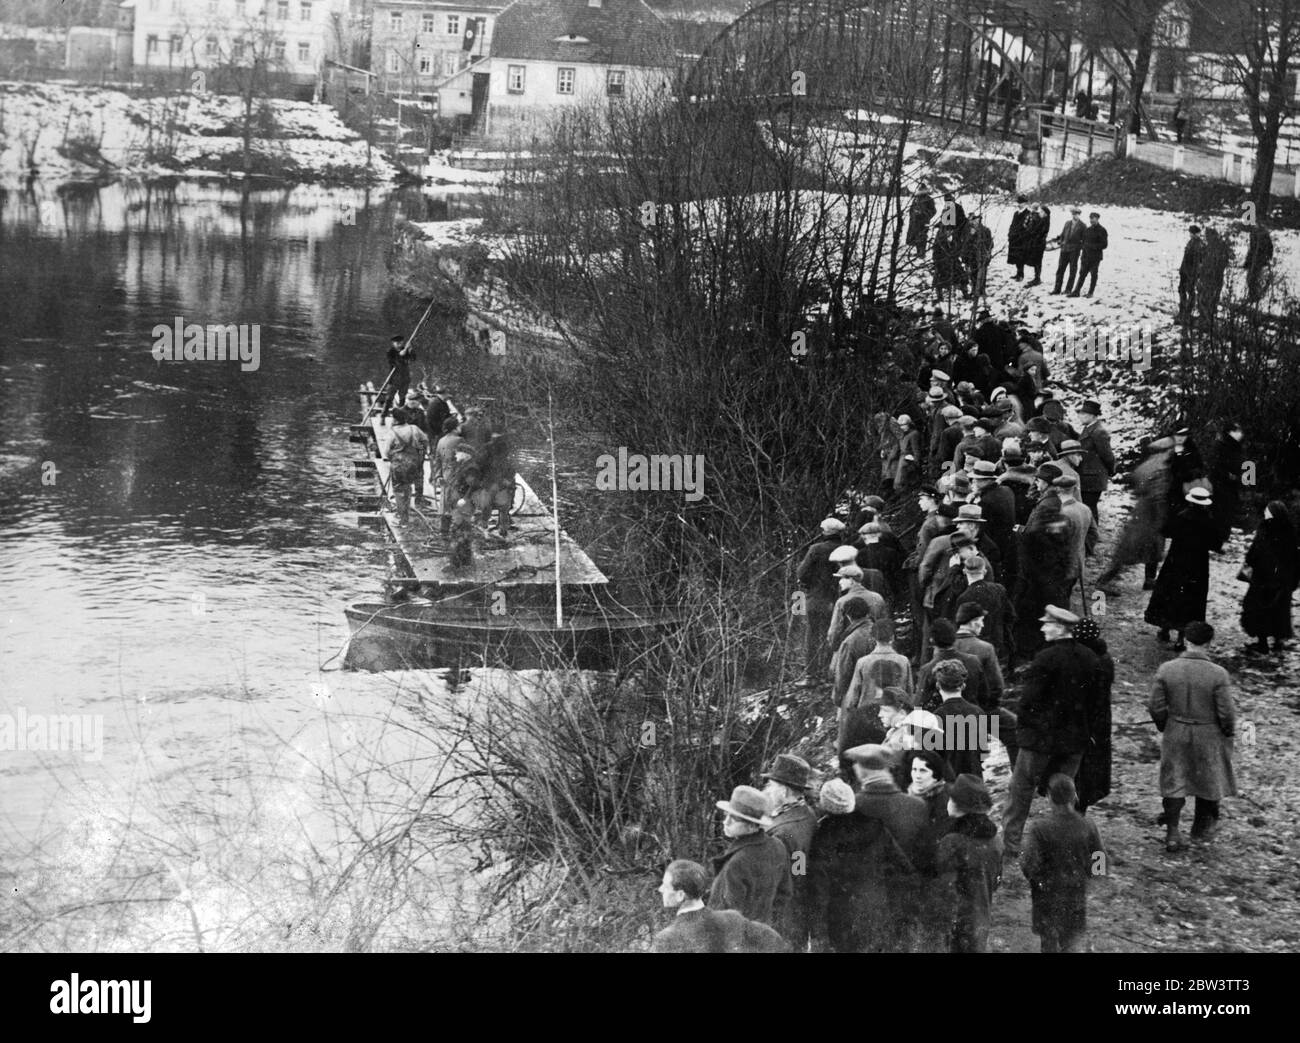 Raft used in river search for victims of German train disaster . Rescue workers are searching from a raft the wates of the River Seale near Gross Heringen , Thuringia , Germany , for bodies of victims of the disastrous railway smash on a bridge over the river which resulted in the loss of 33 lives and injury to scores of people . Photo shows a crowd watching the search of the River Saale near Gross Heringen . 28 December 1935 Stock Photo